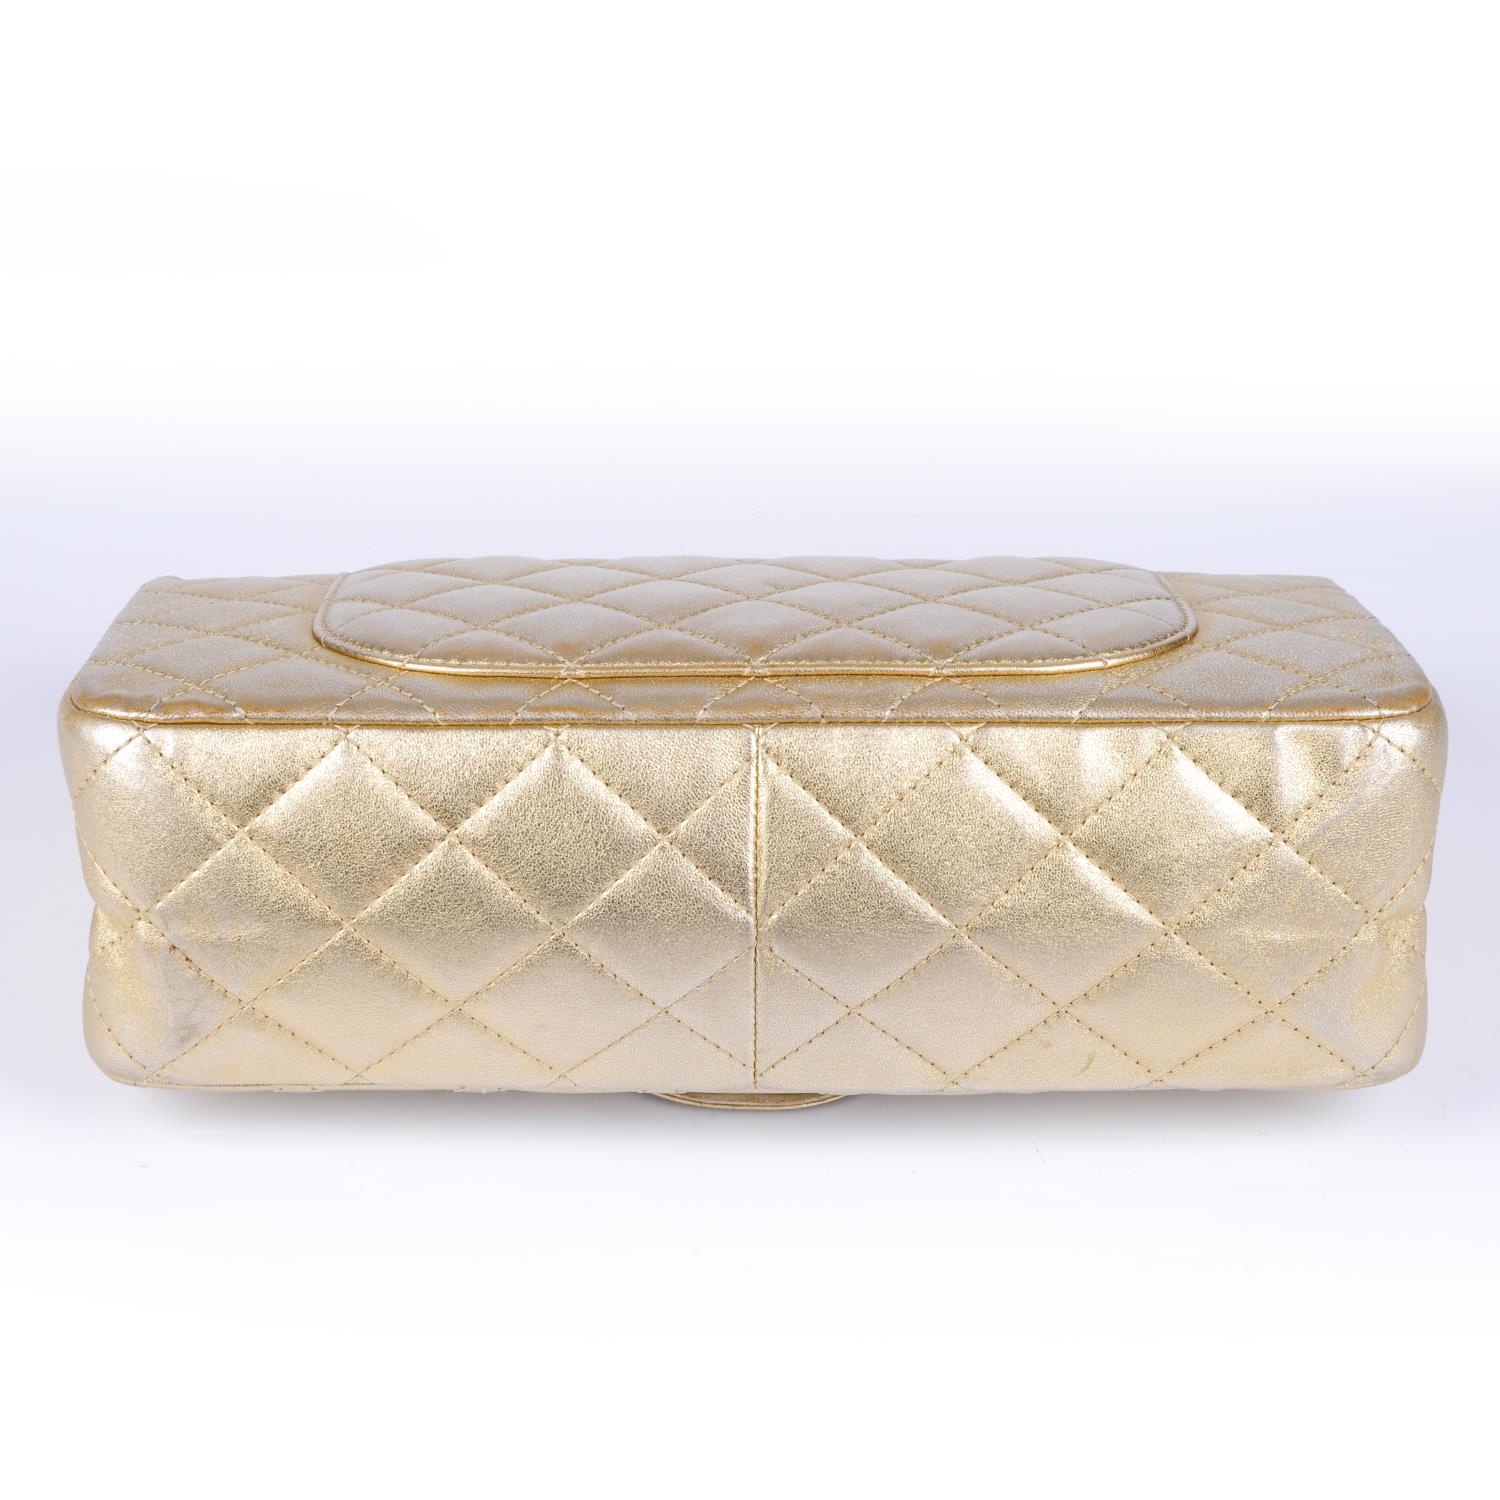 CHANEL - a metallic gold quilted 2.55 Reissue Flap 227 handbag. - Image 4 of 4